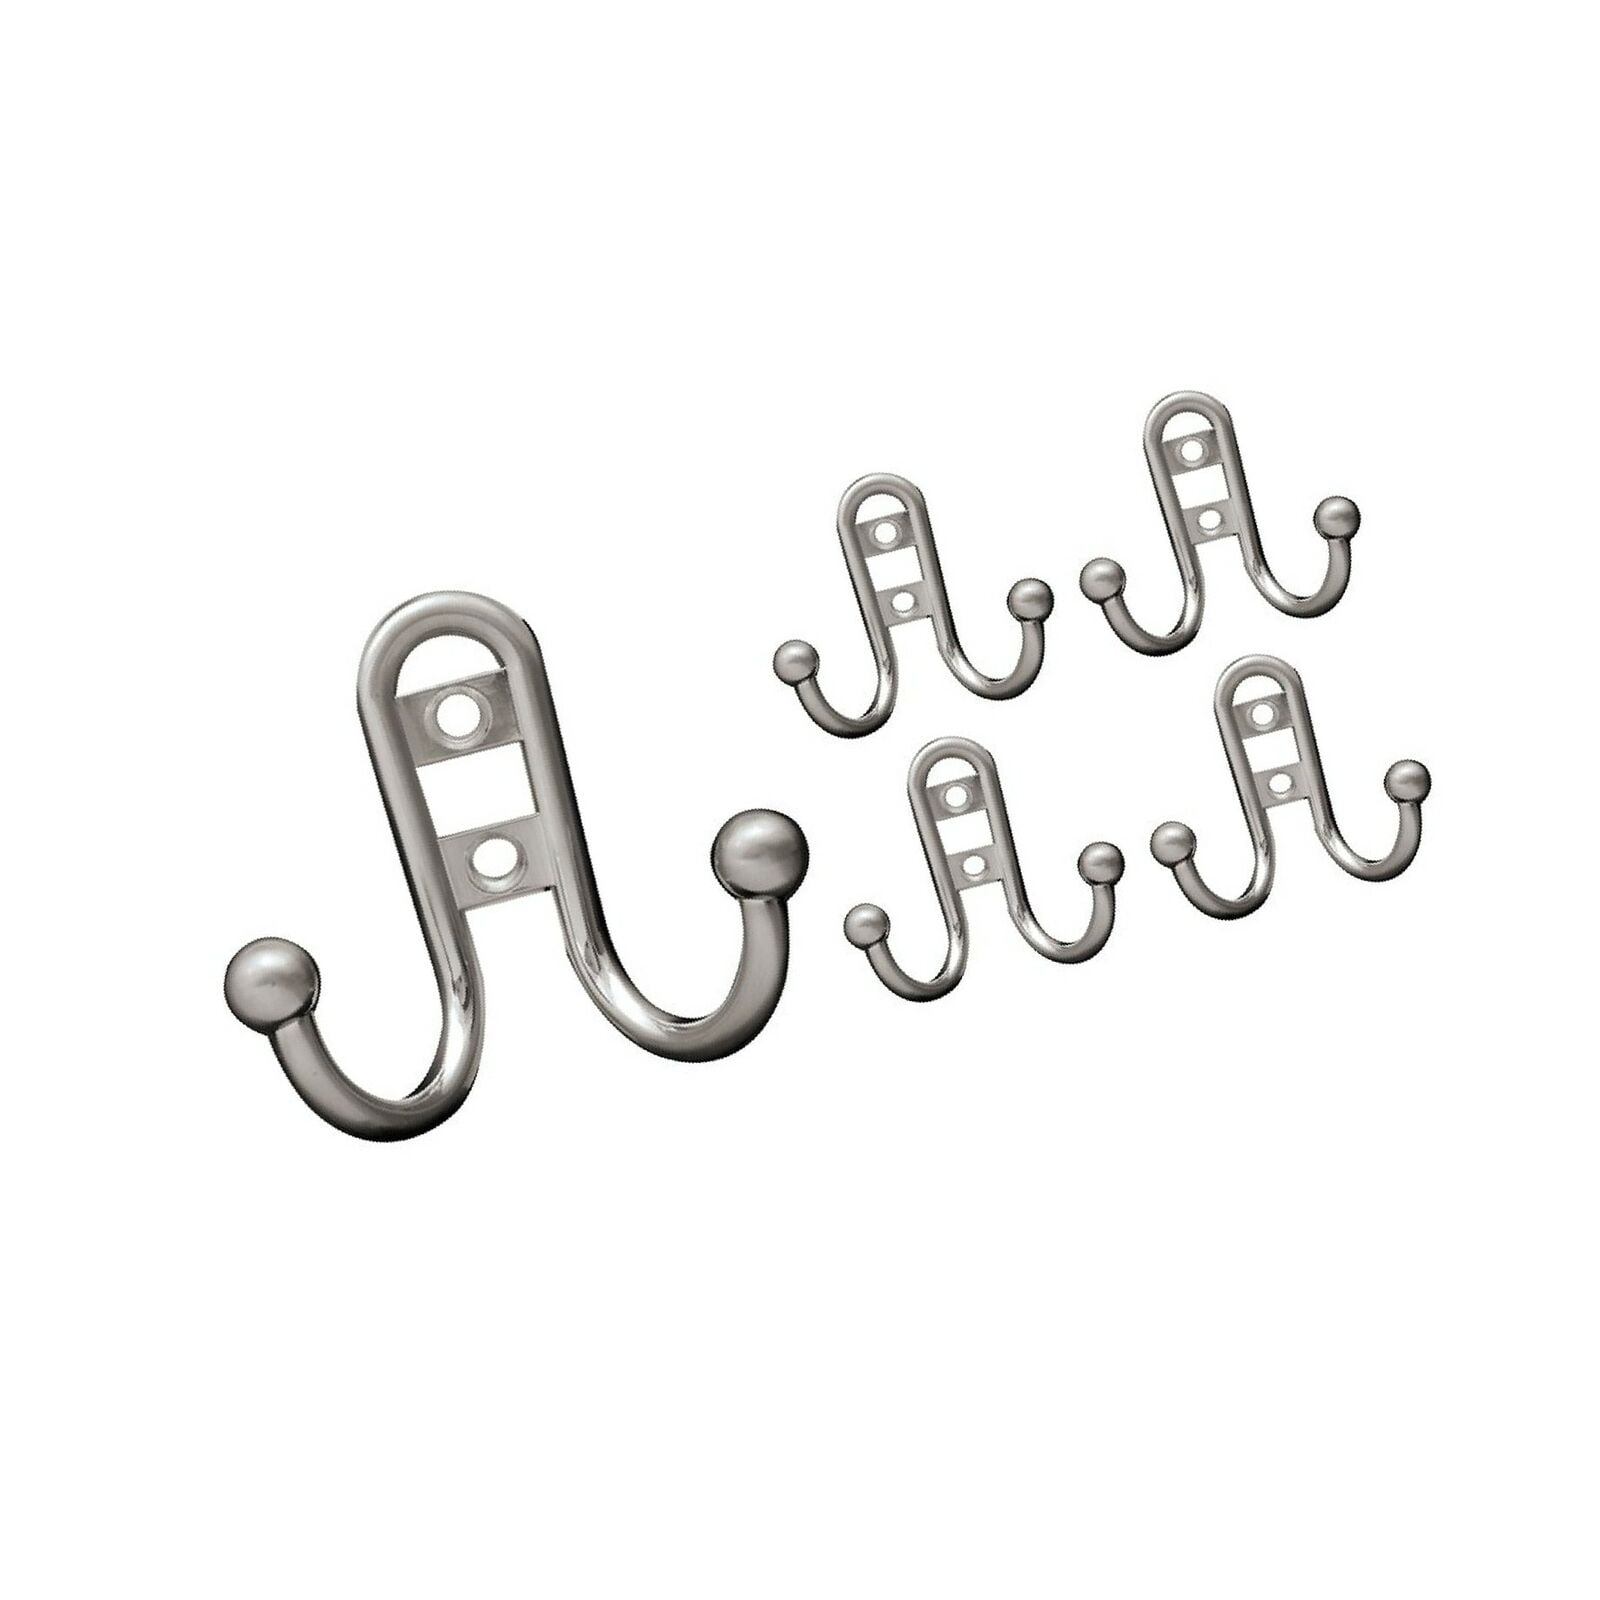 Franklin Brass B46115M-PC-C Double Prong Robe Hook with Ball End 5 Pack Polished Chrome